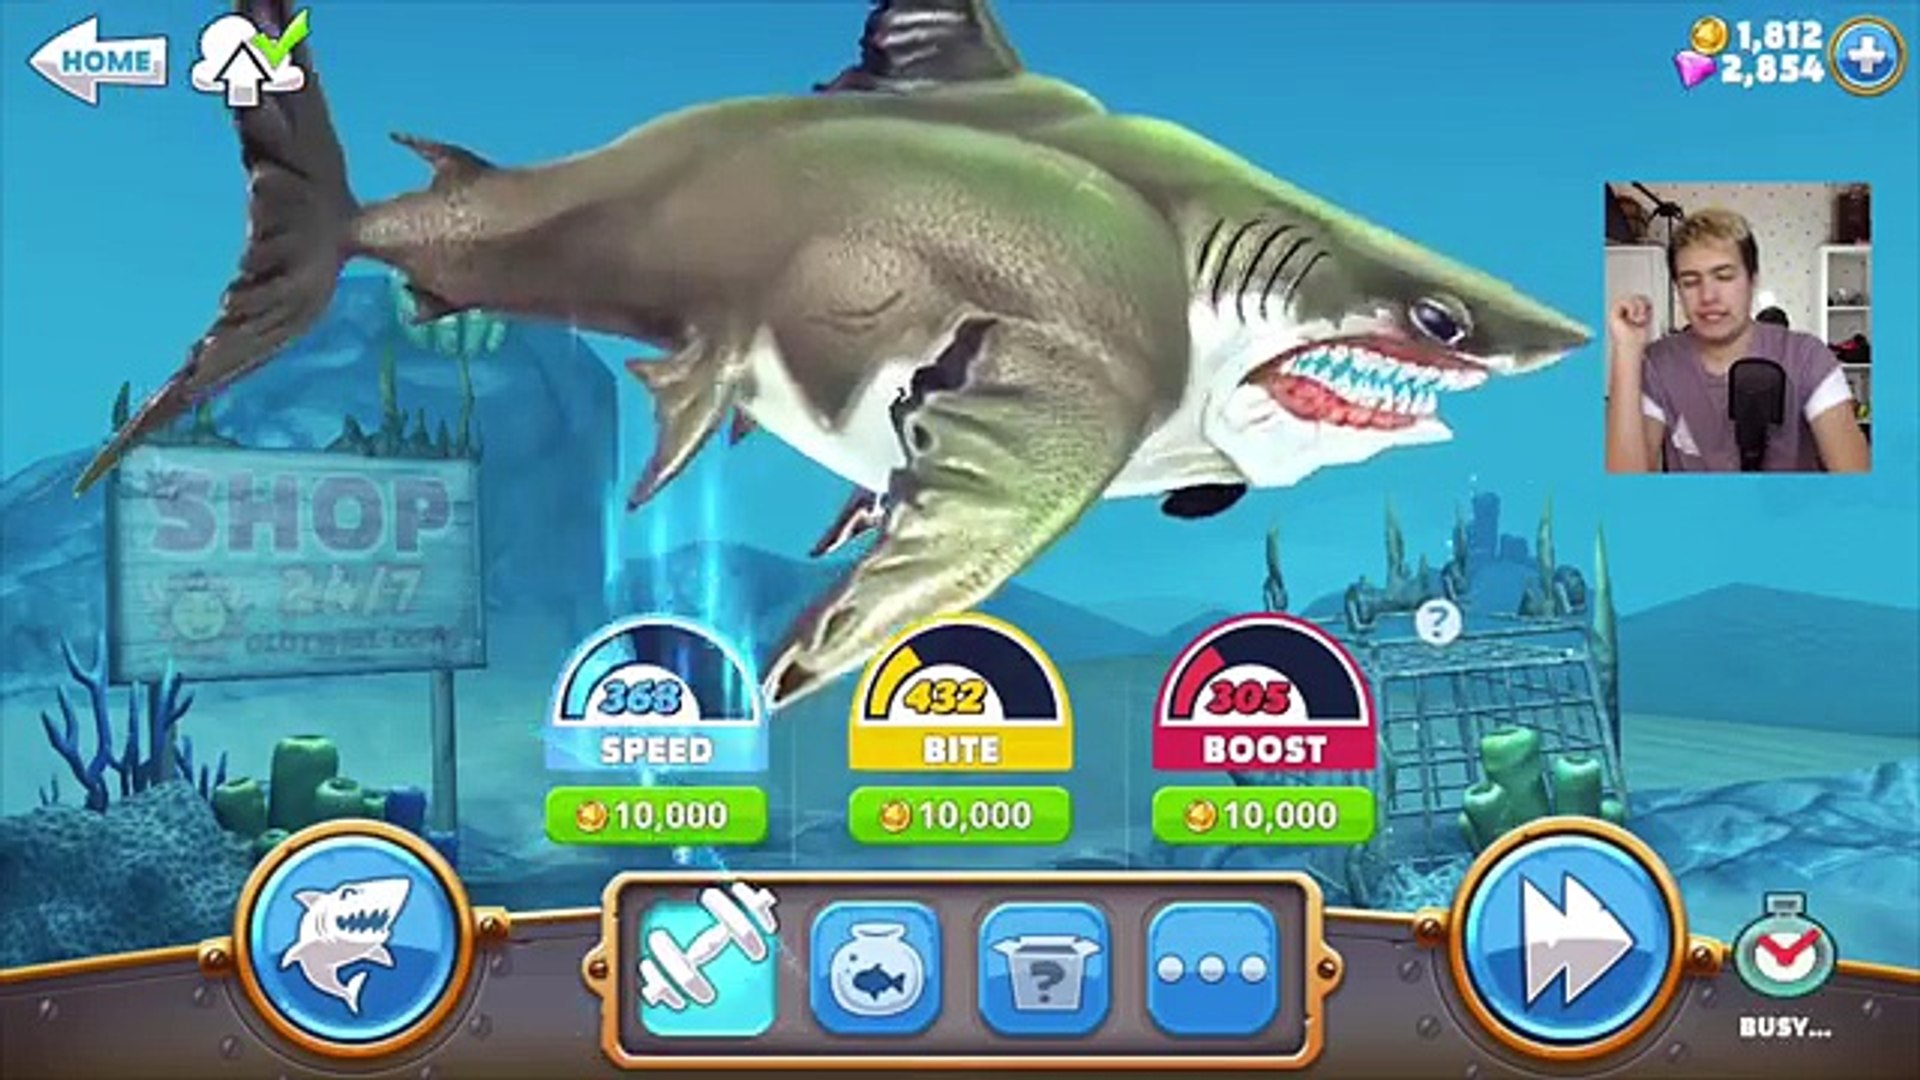 MEGALODON MEGALODON MEGALODON MEGALODON! | Hungry Shark World Part 8 -  video Dailymotion